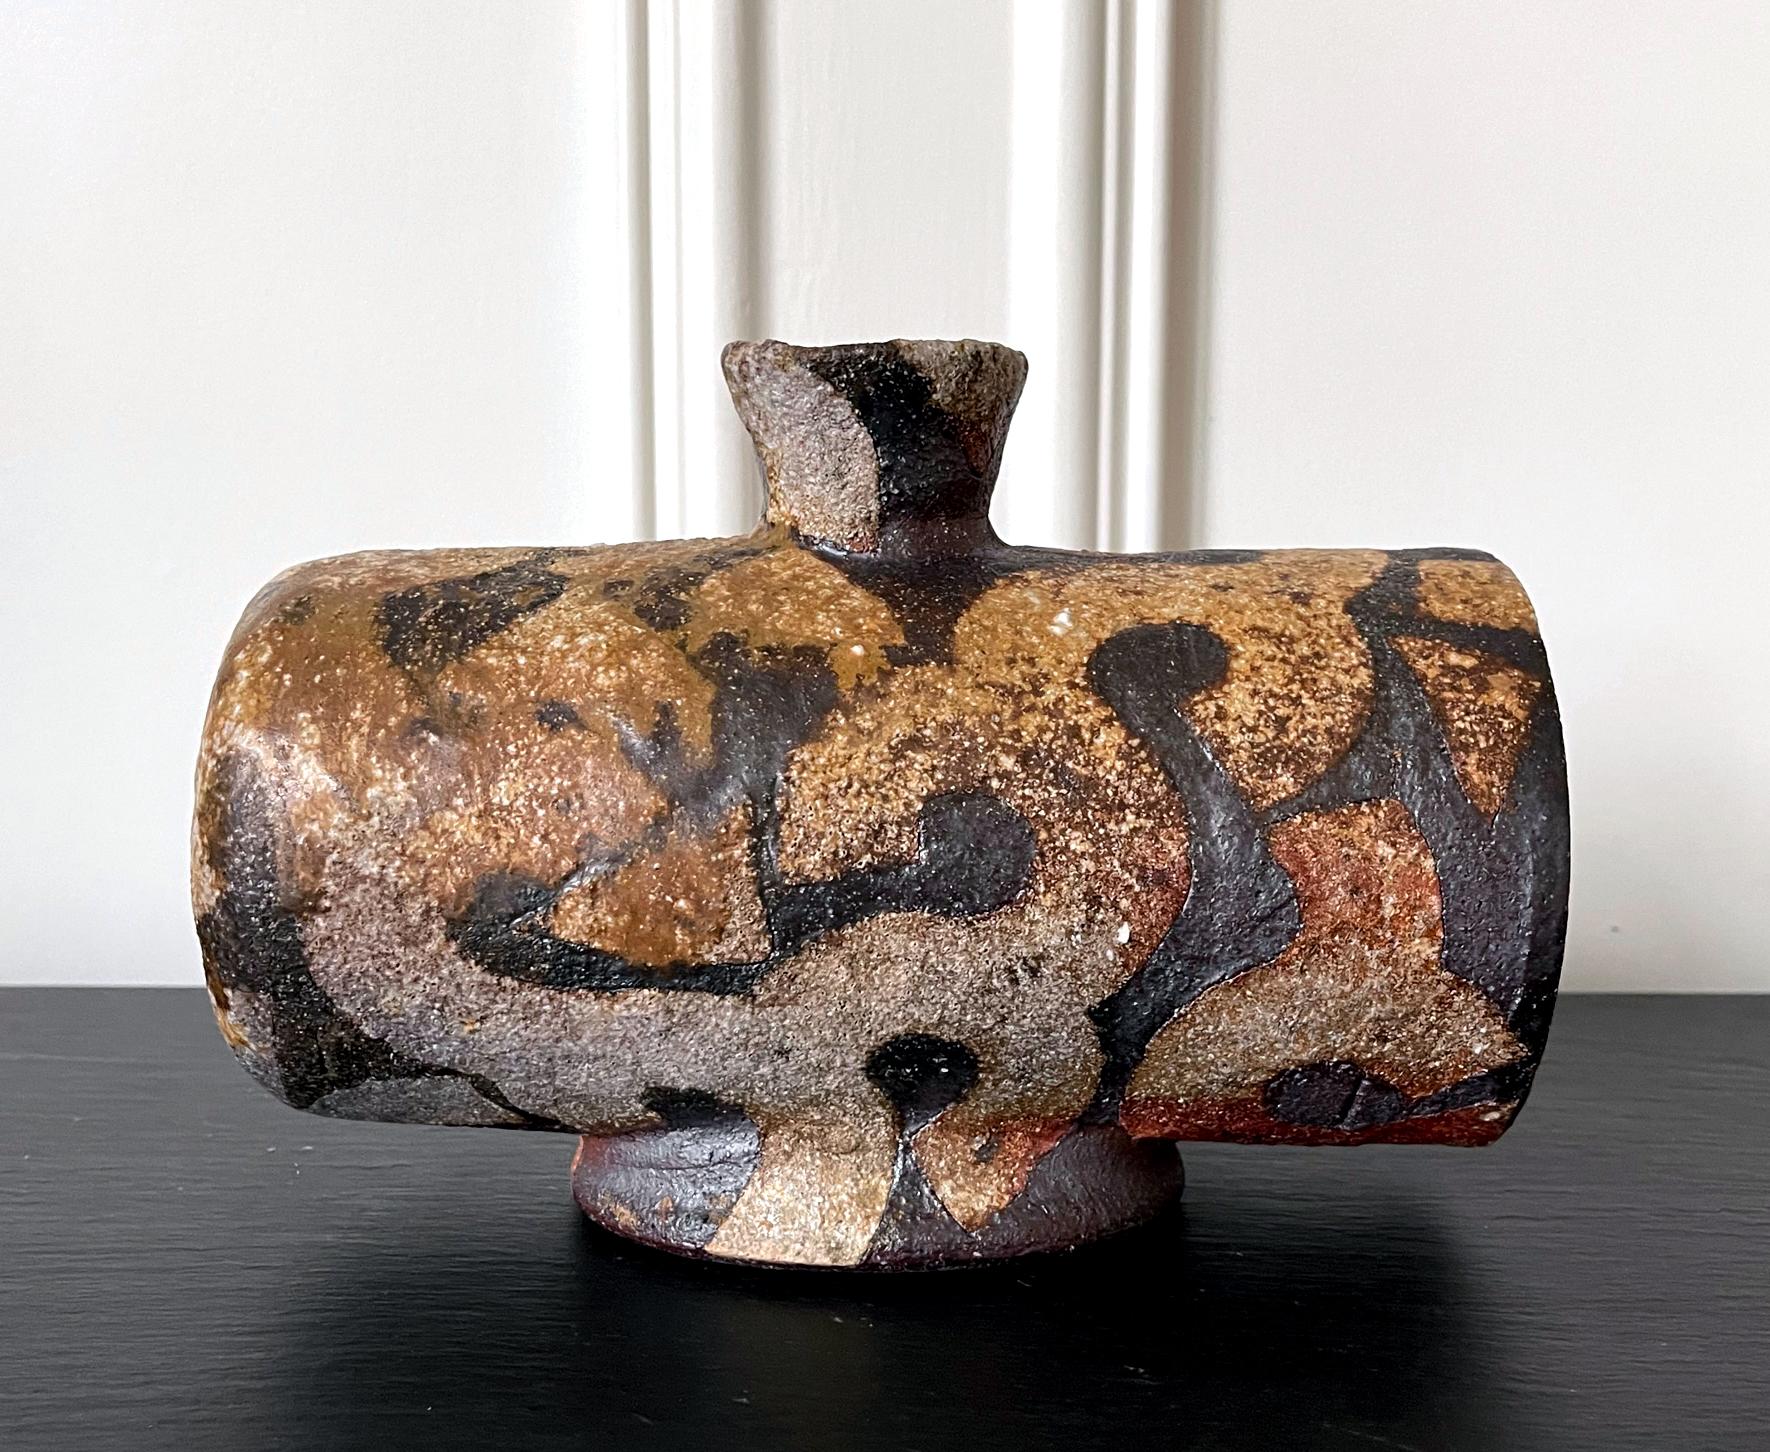 An unusual zogan stoneware vase by potter Takauchi Shugo (Japanese, b. 1937) circa 1980-1990s. The vase strikes an unusual horizontal form with a barrel shape body supported by a short oval foot ring and opens to a small upright short-necked mouth.